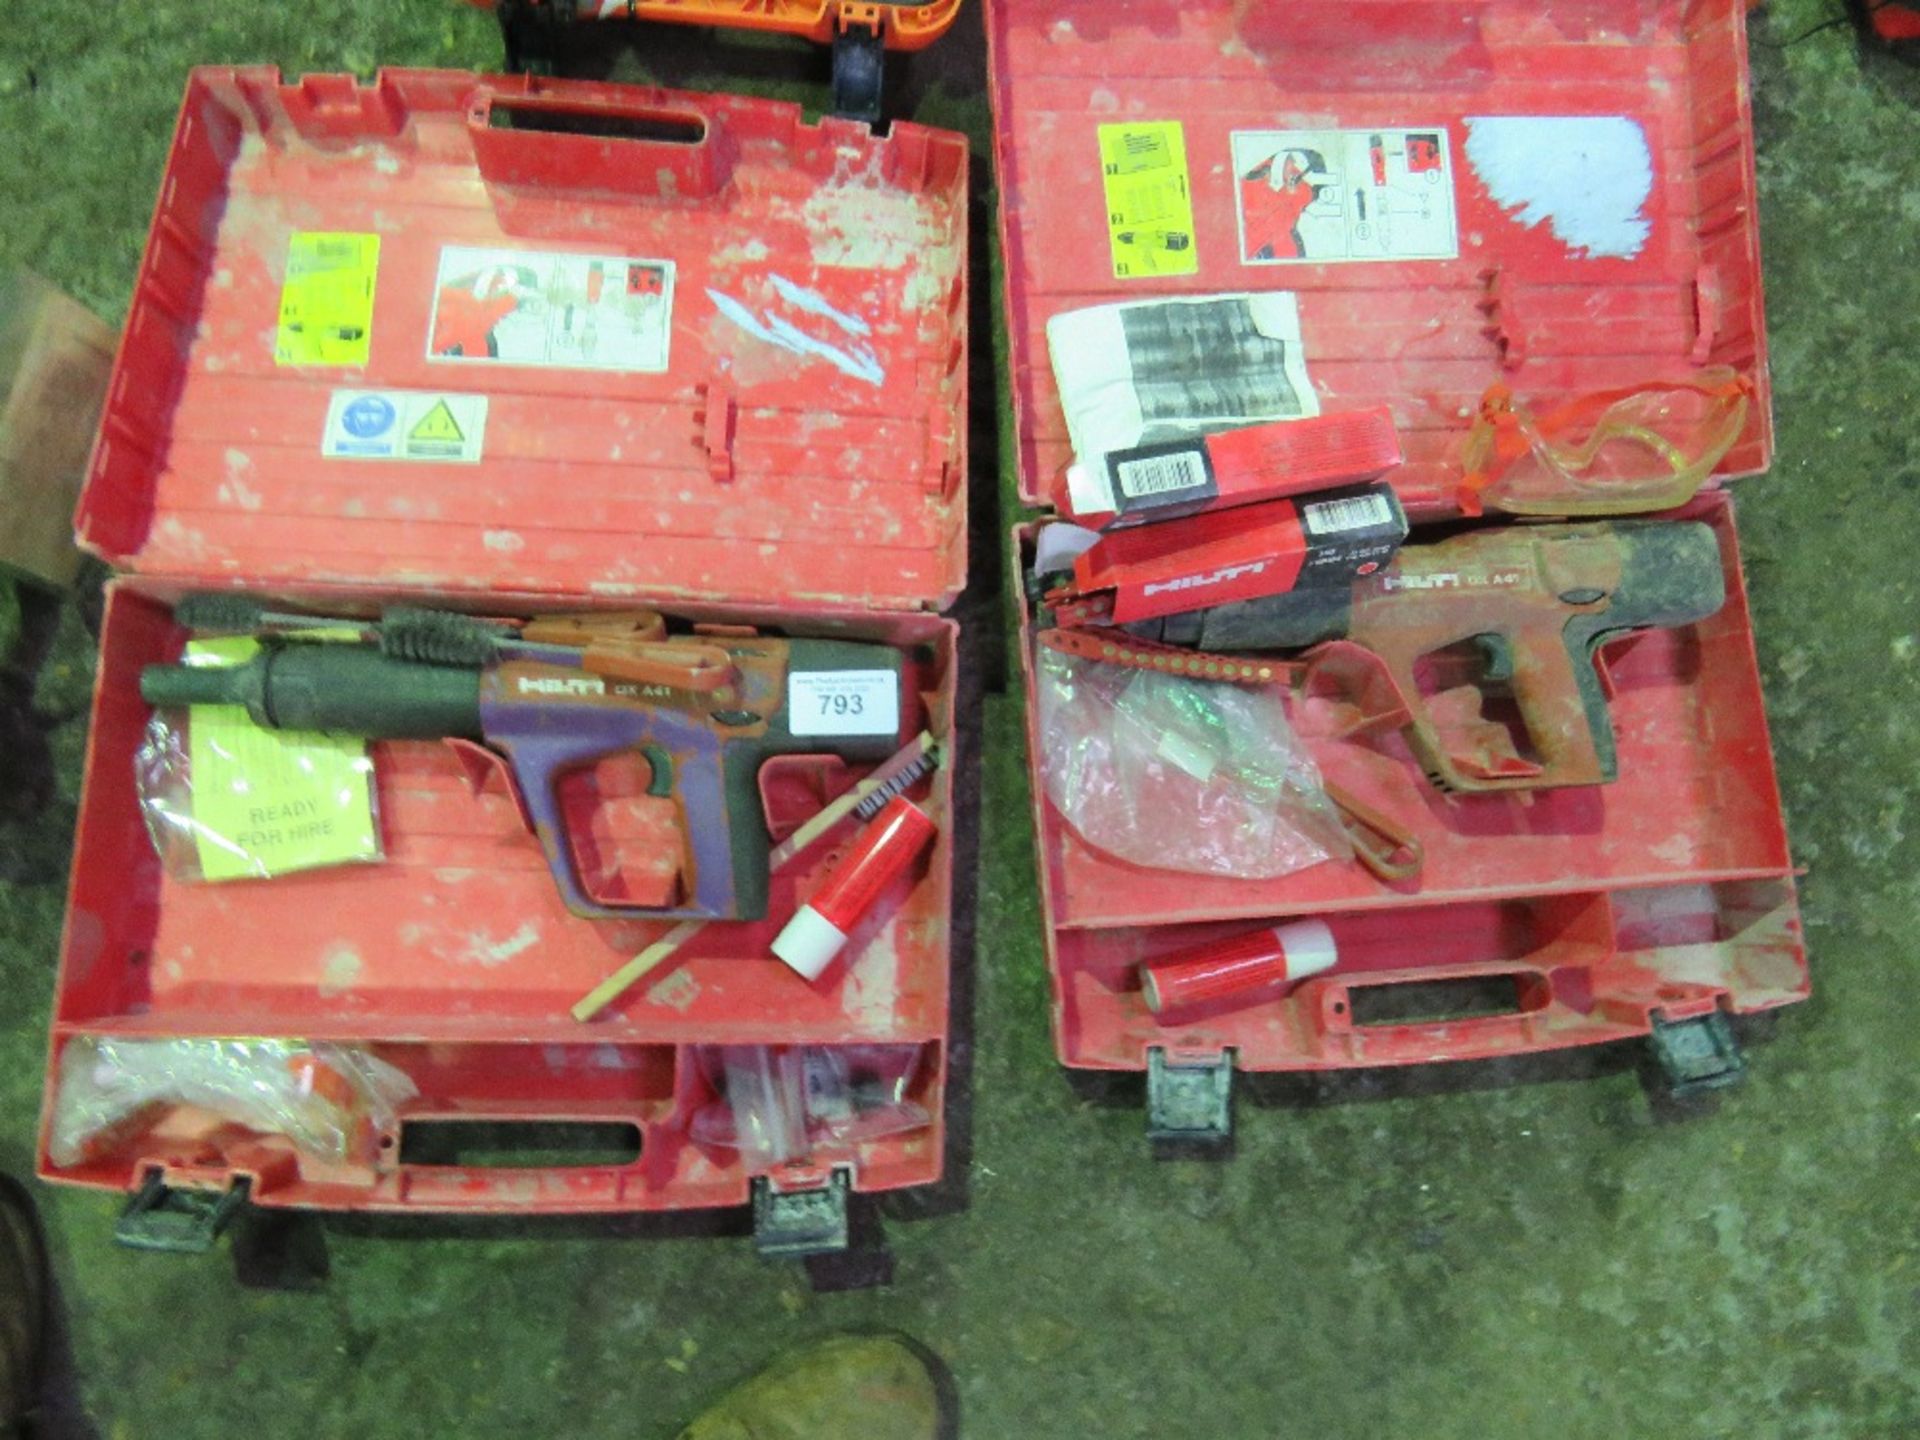 2 X HILTI DXA41 CARTRIDGE NAIL GUNS IN CASES......SOURCED FROM COMPANY LIQUIDATION